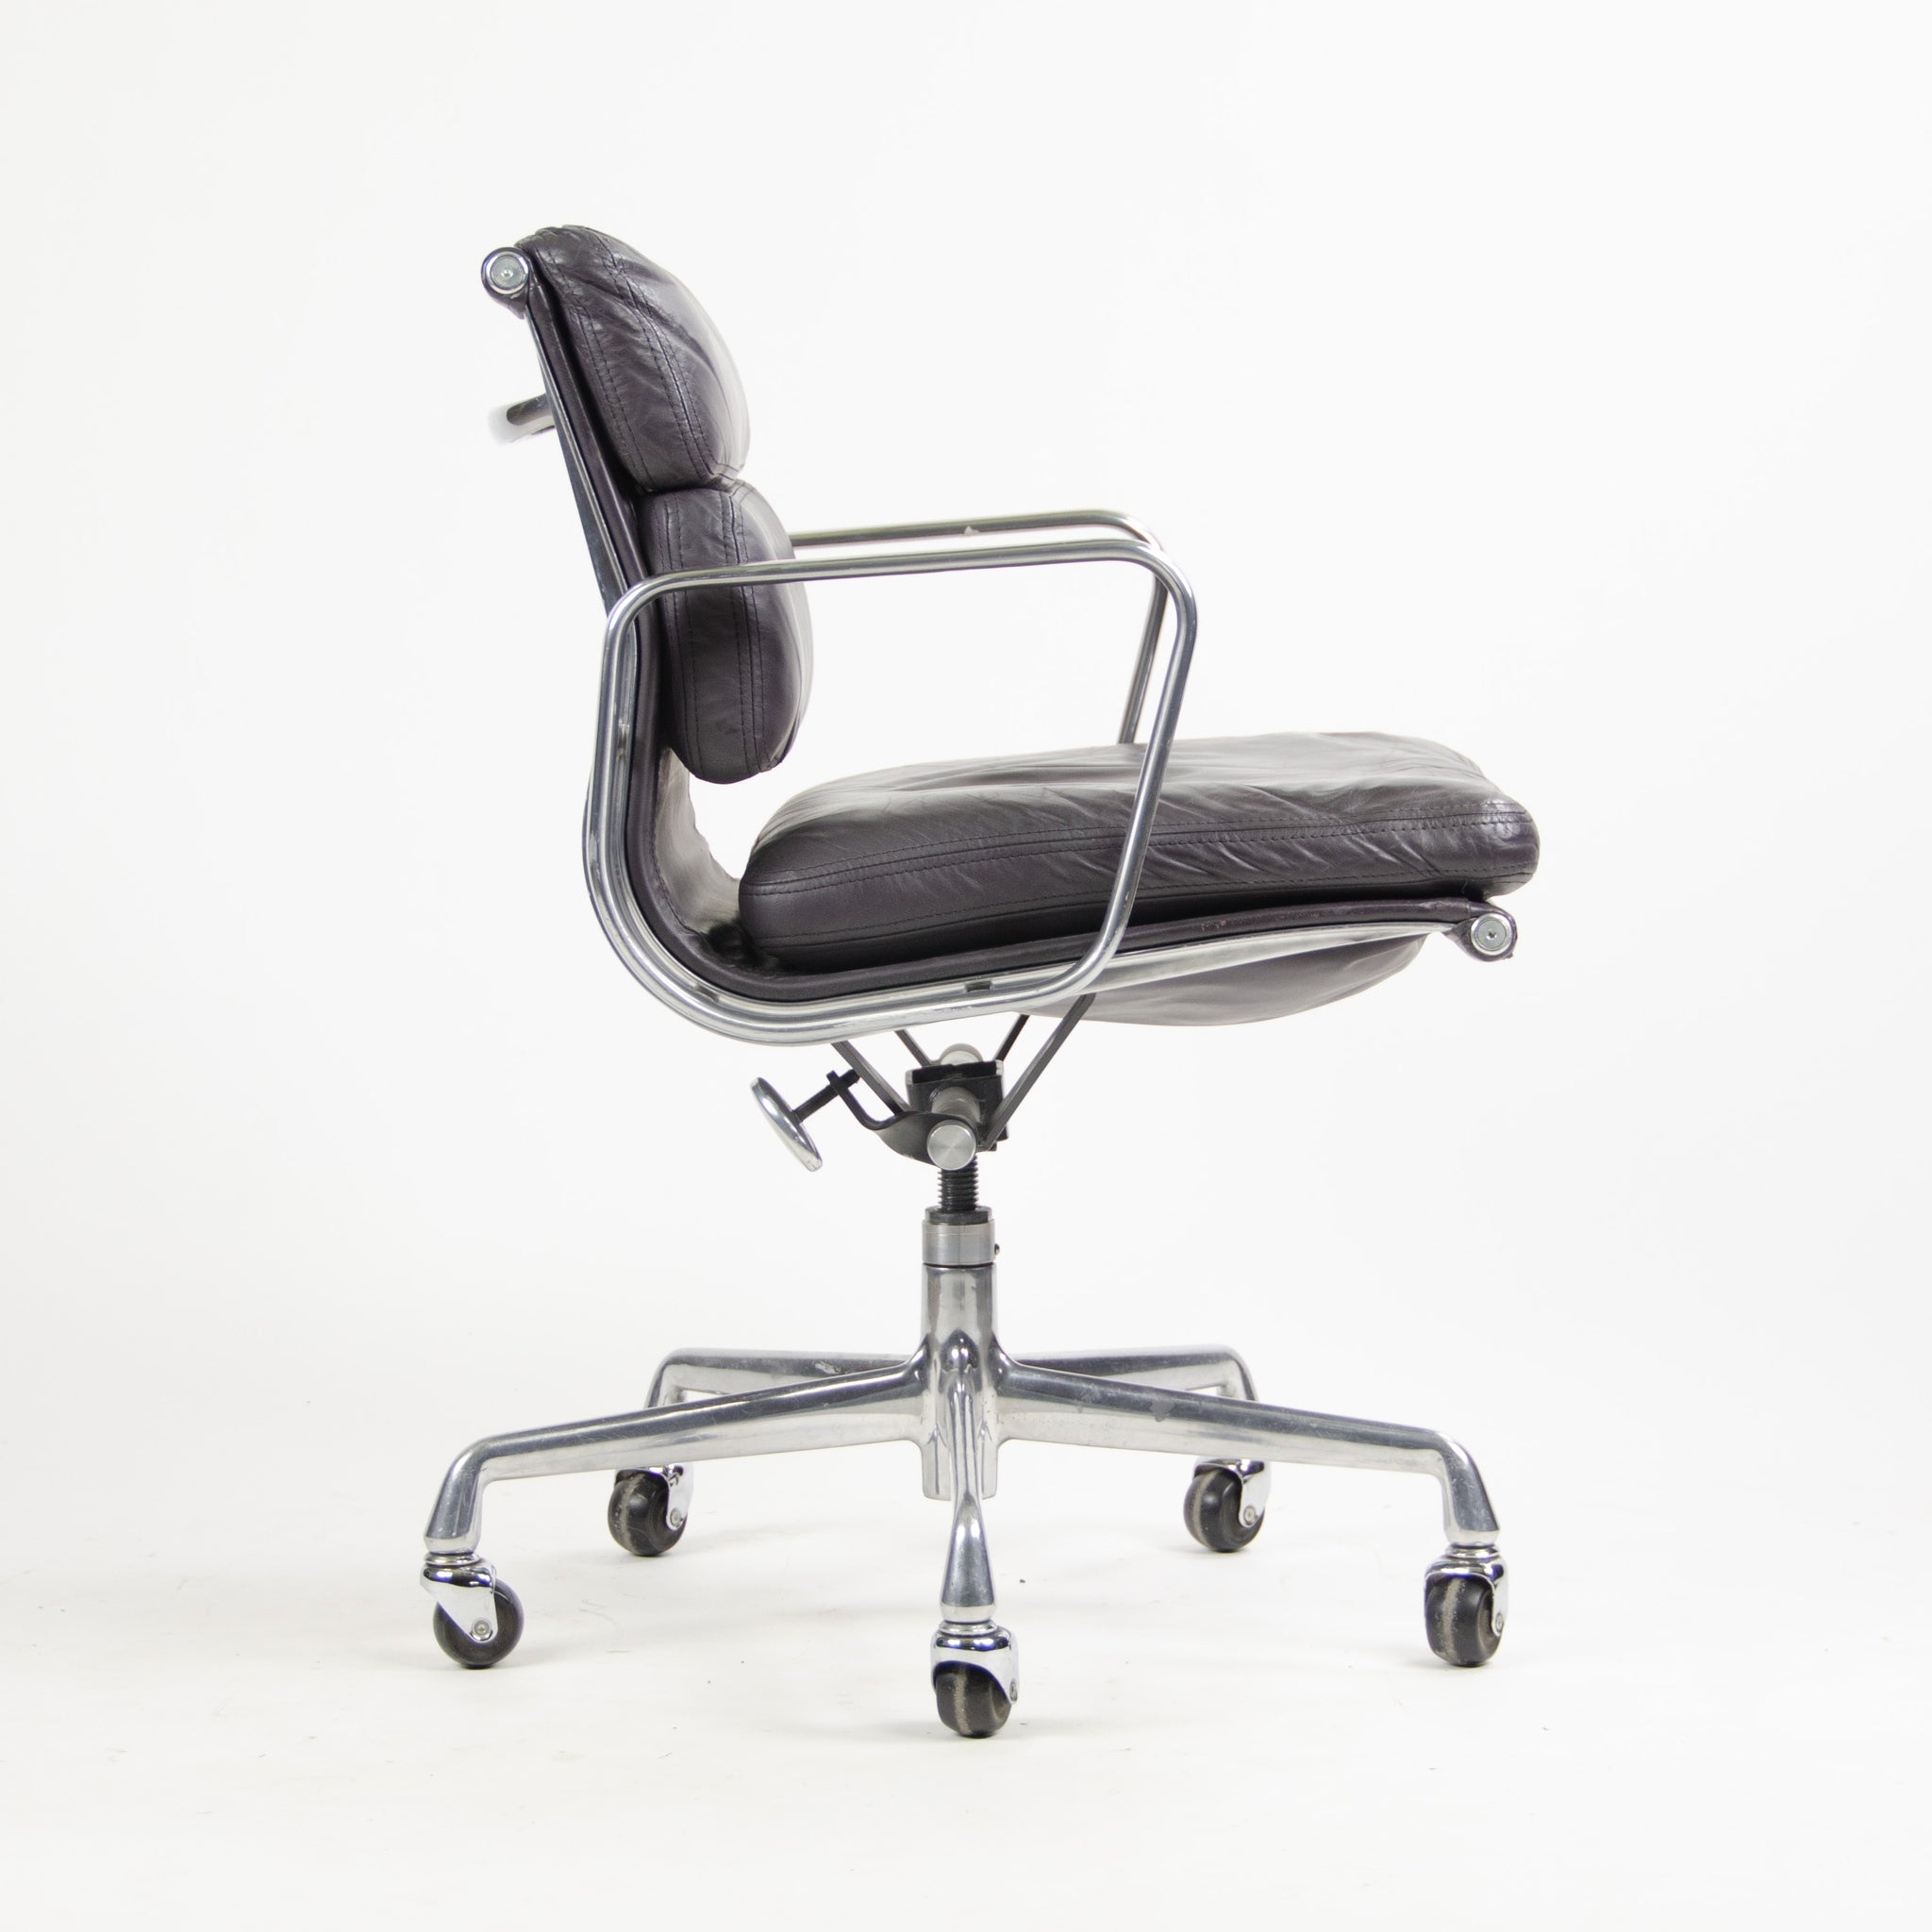 SOLD Herman Miller Eames 1987 Soft Pad Low Aluminum Group Chair Gray/Blue Leather 3x Available